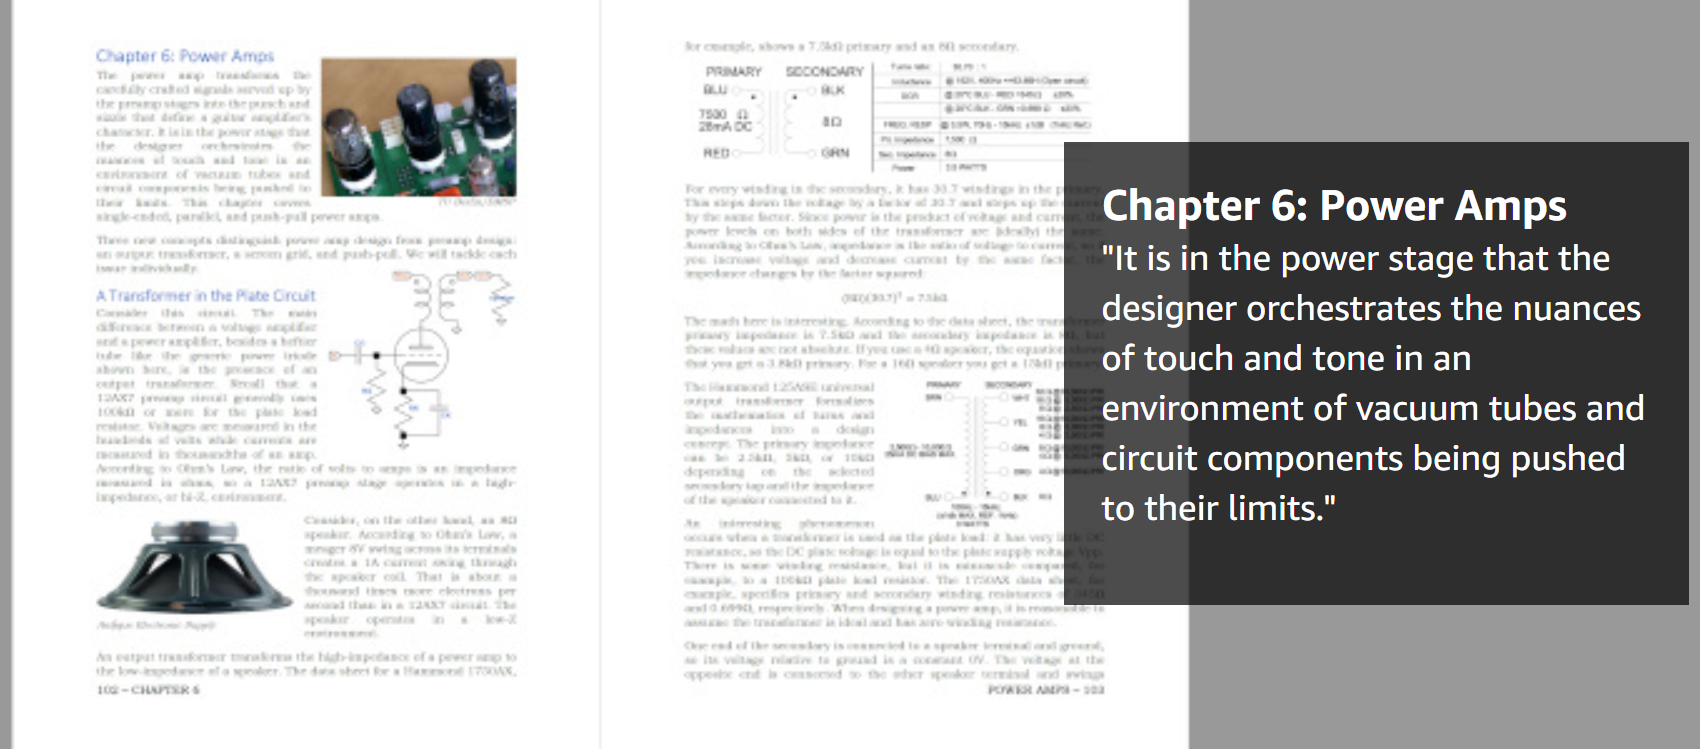 Guitar Amplifier Electronics Basic Theory book excerpt